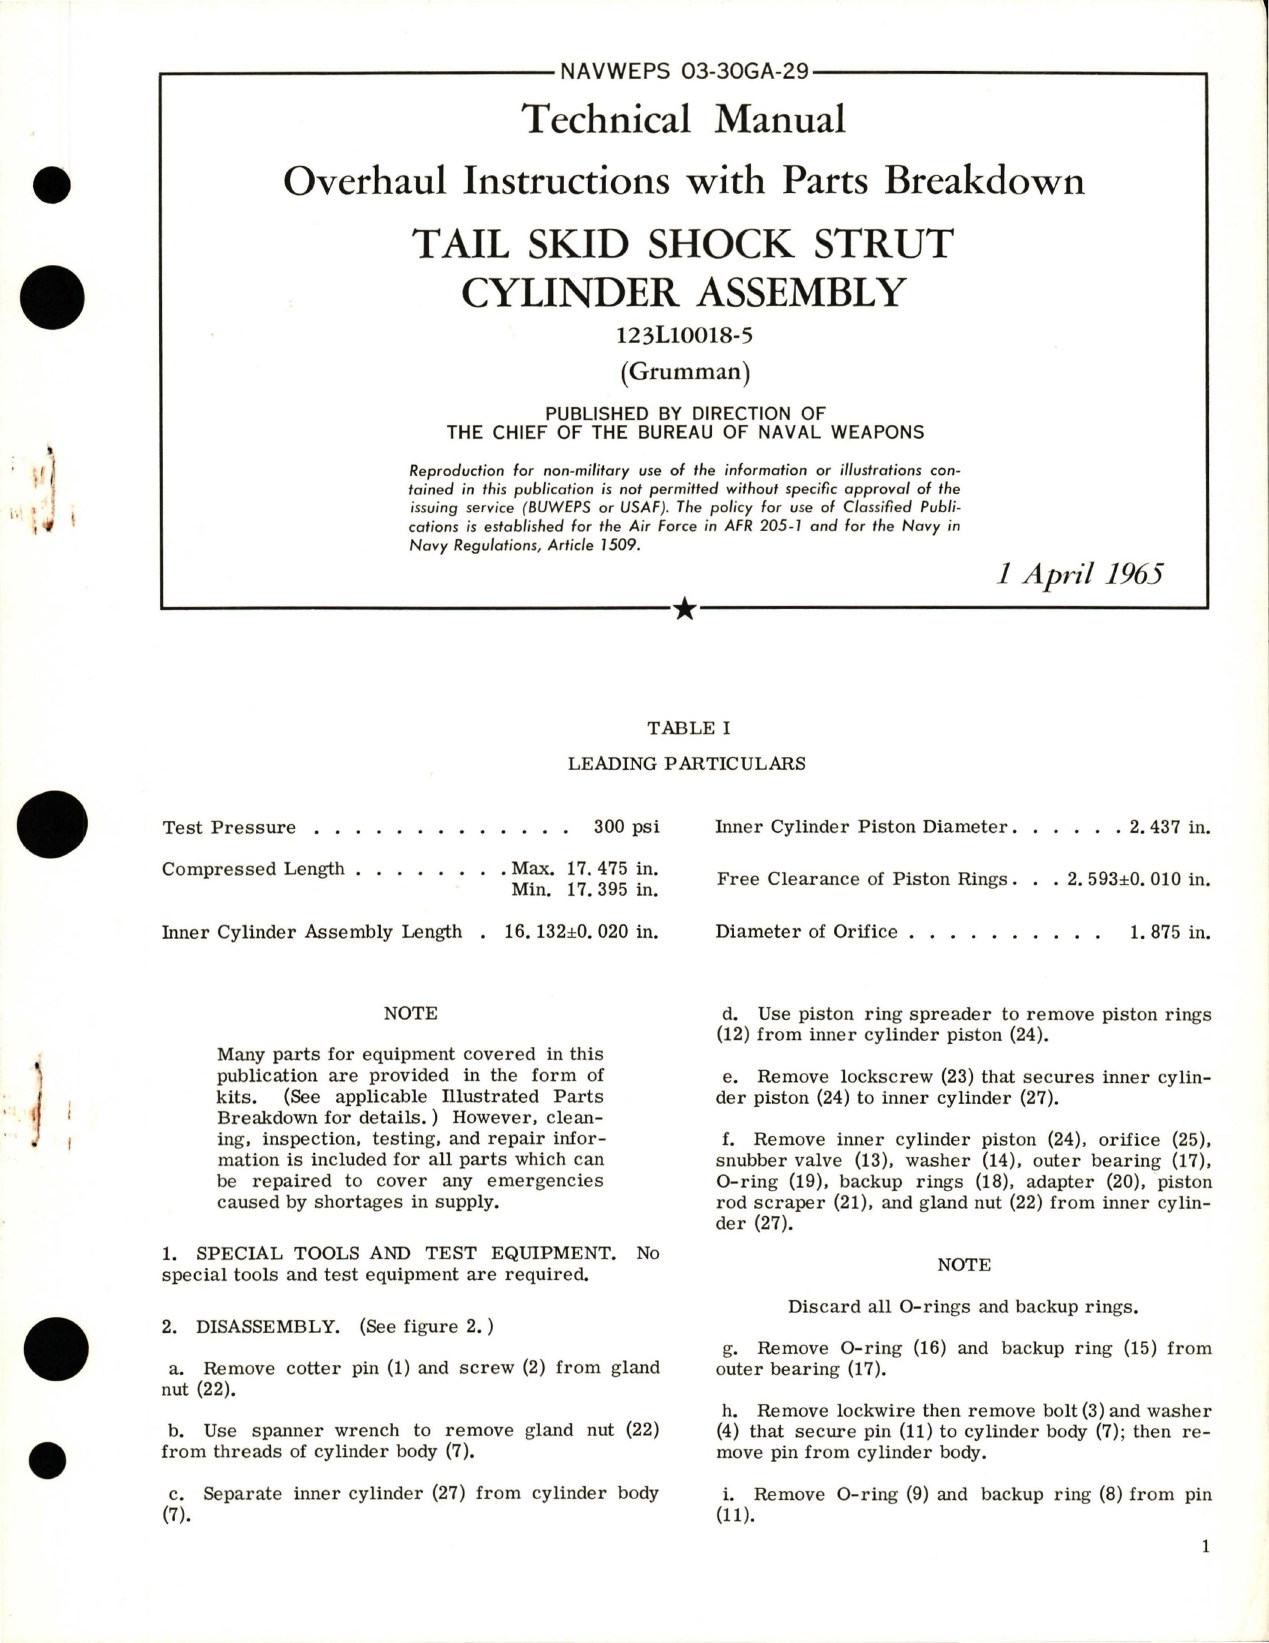 Sample page 1 from AirCorps Library document: Overhaul Instructions with Parts for Tail Skid Shock Strut Cylinder Assembly - 123L10018-5